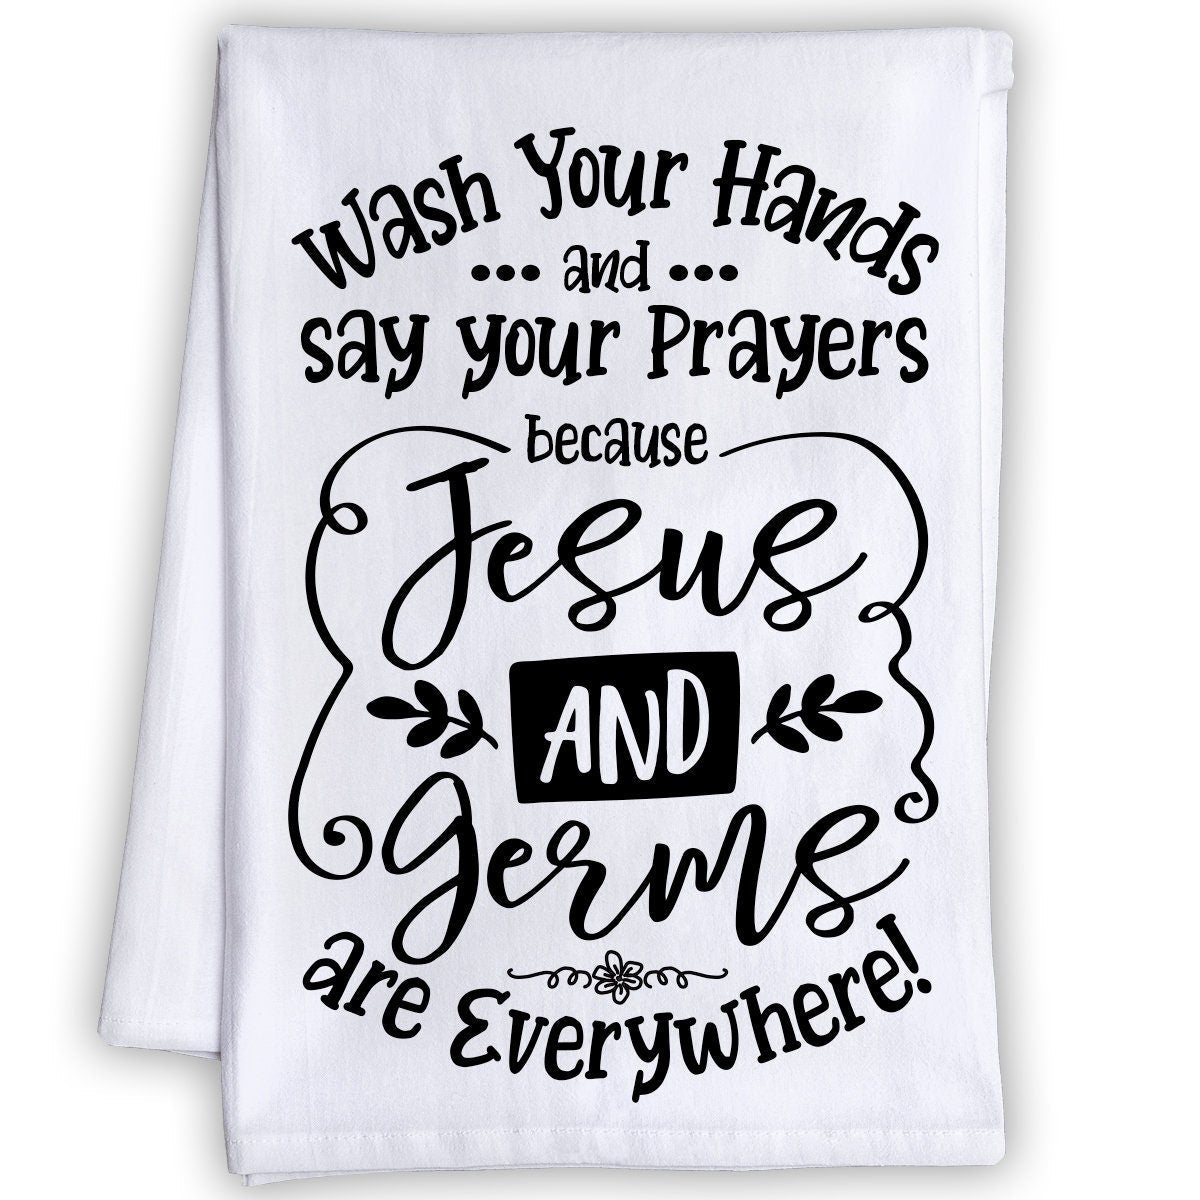 Wash Your Hands and Say Your Prayers - Tea Towel - Lone Star Art